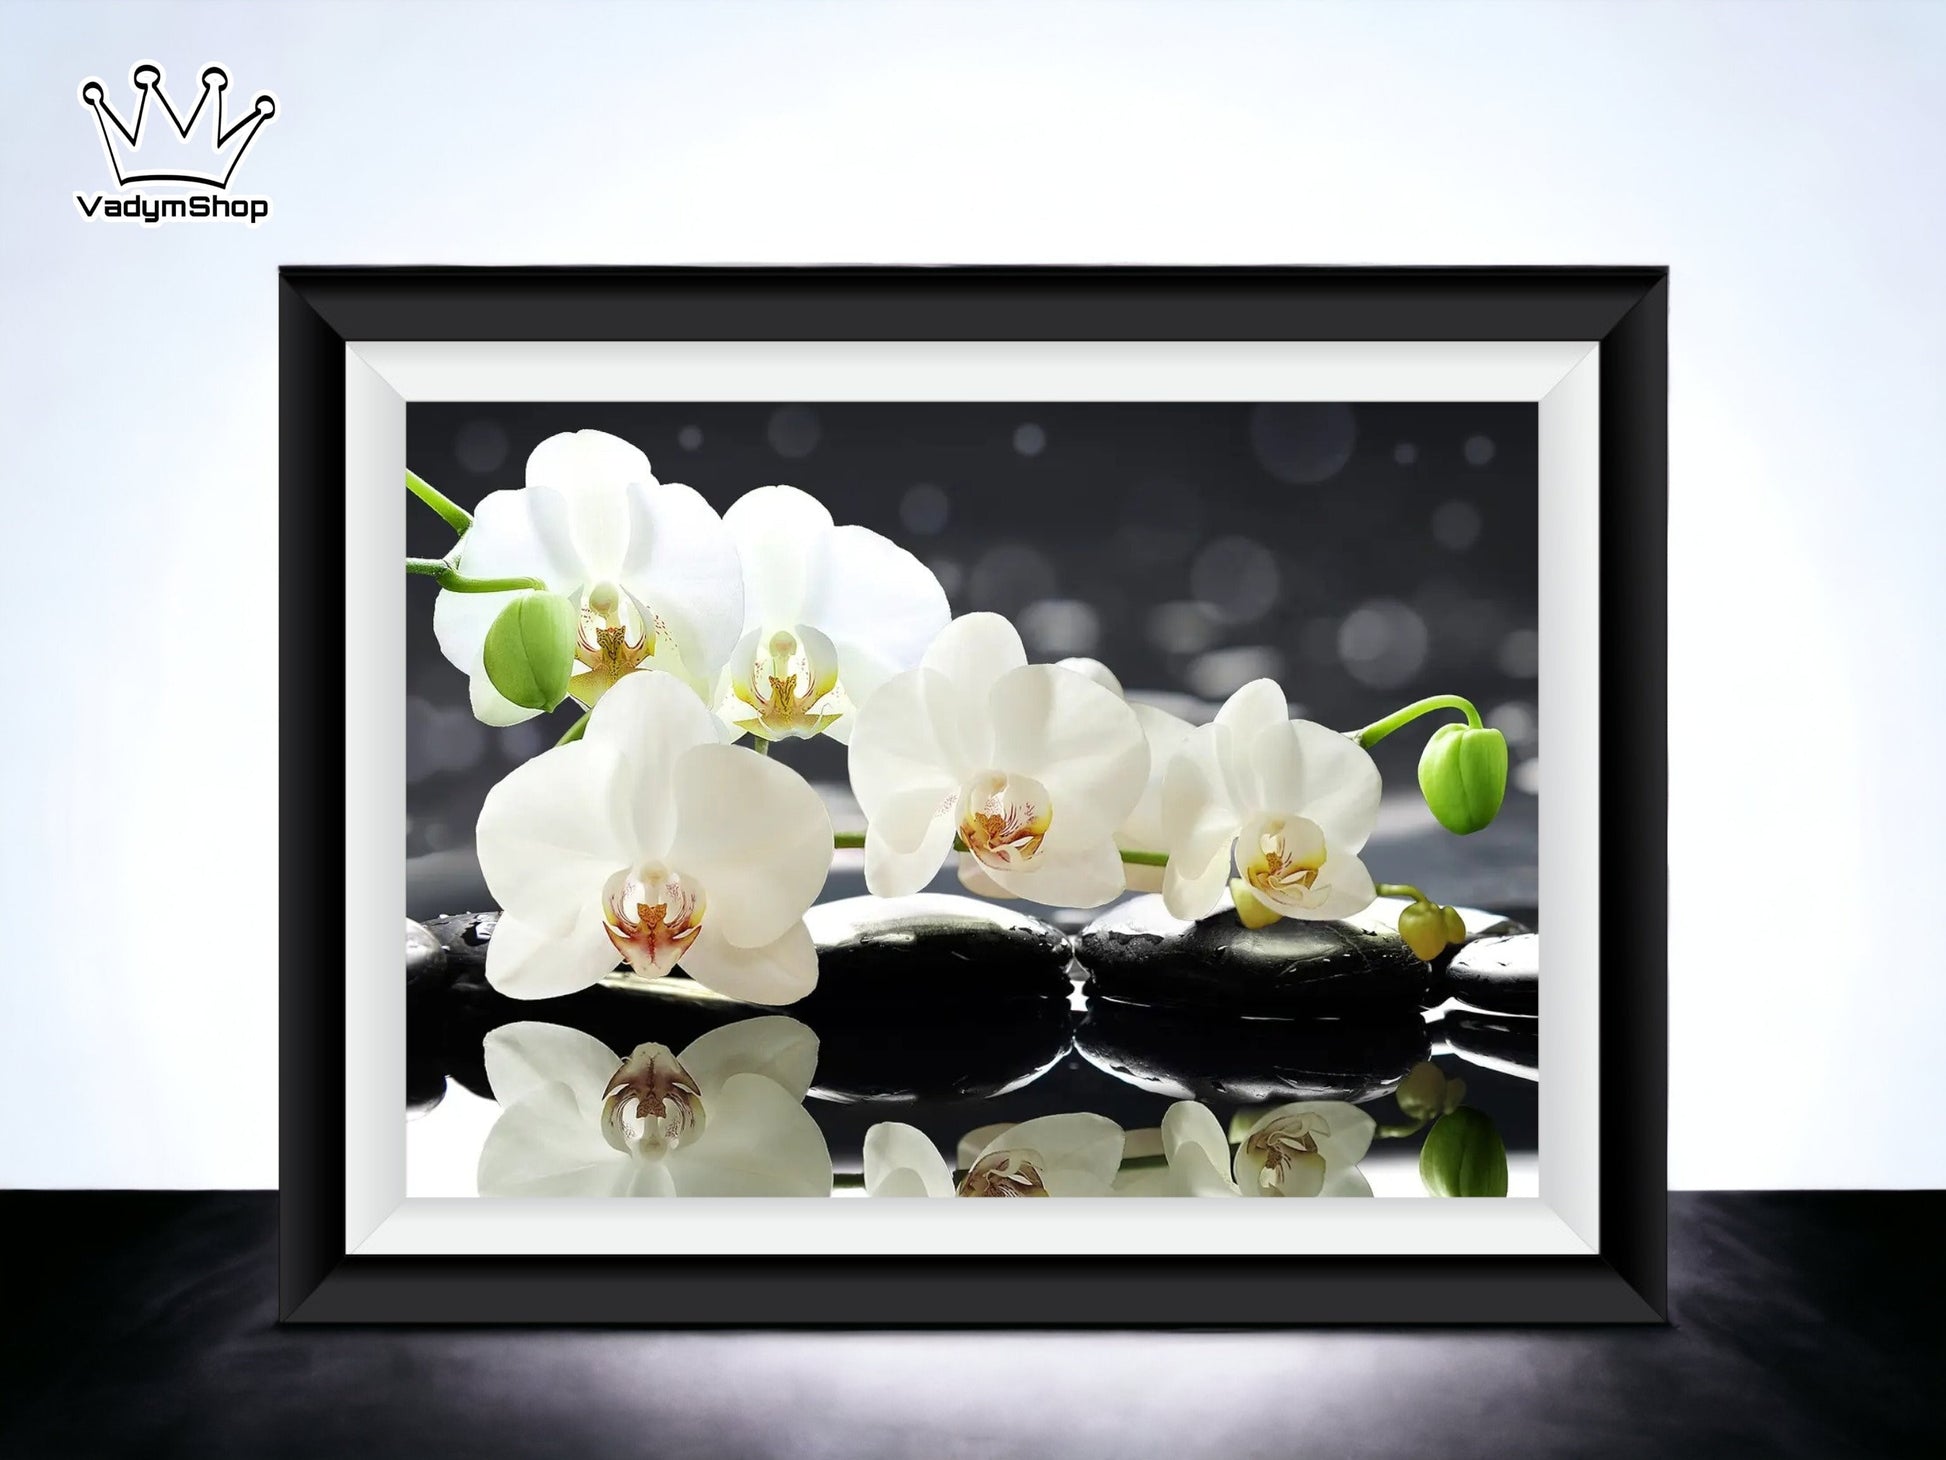 DIY Bead embroidery kit  "White orchid". - VadymShop